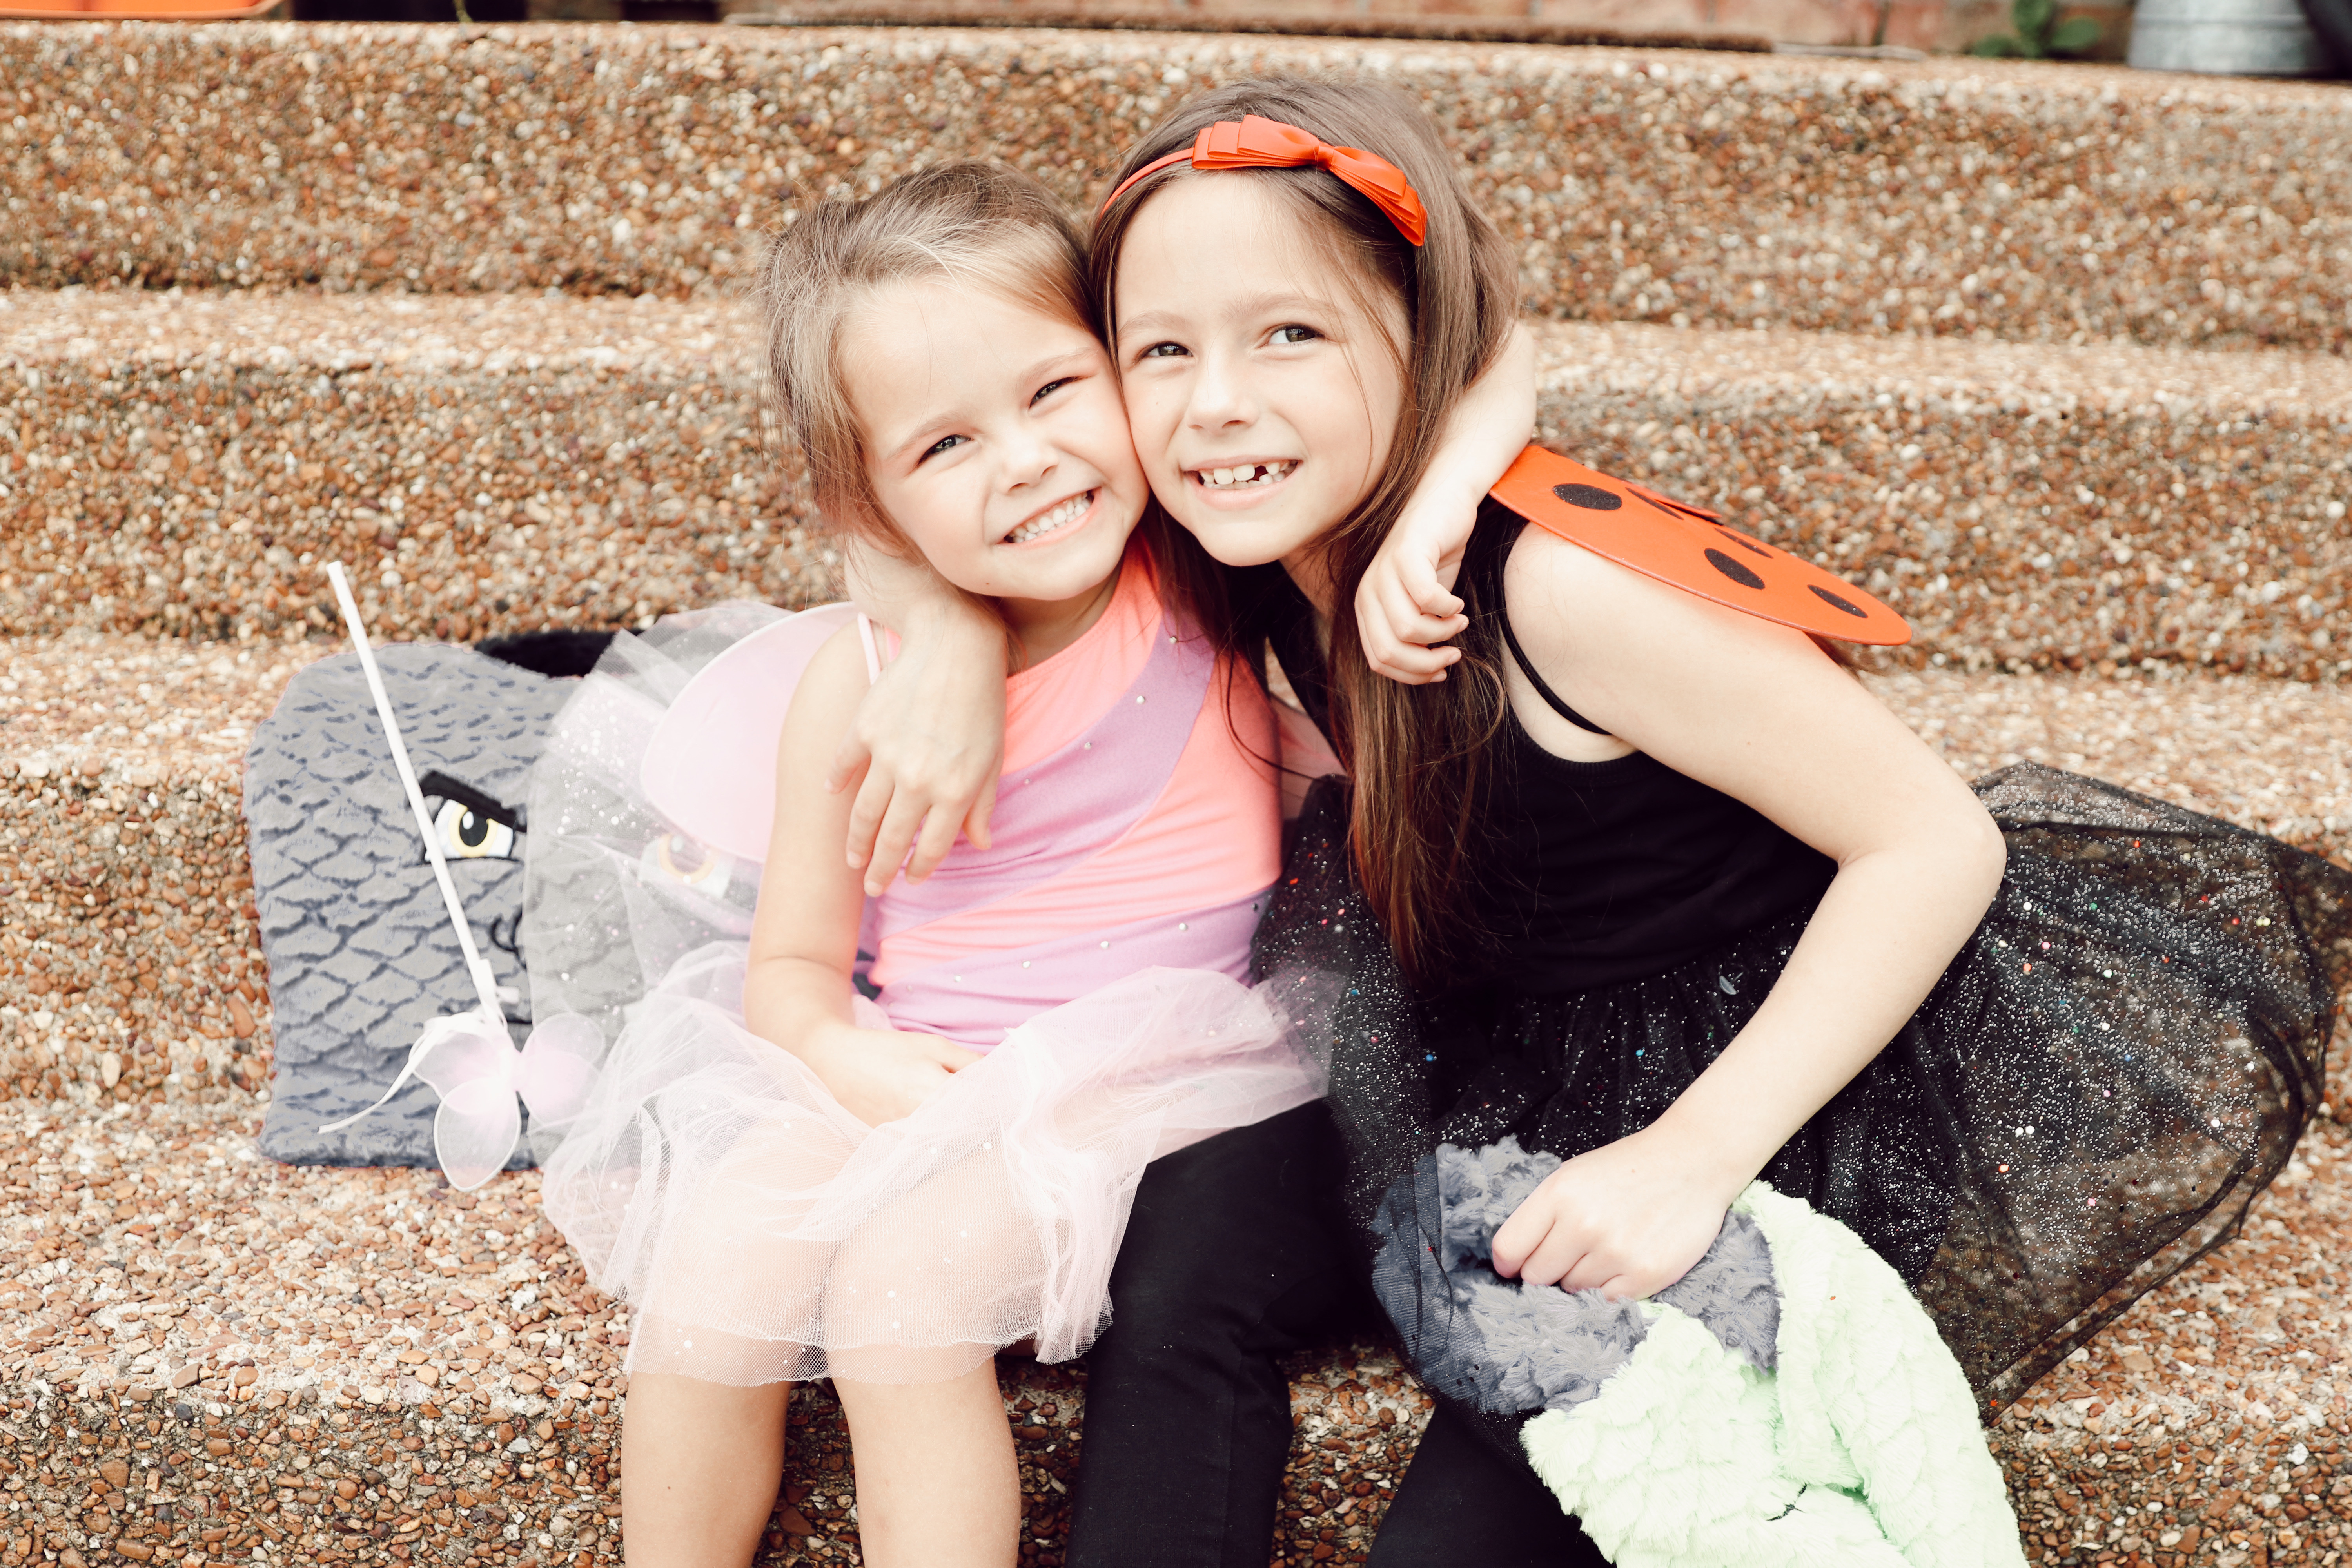 Halloween Activities for Families by popular Nashville lifestyle blog, Nashville Wifestyles: image of two girls dressed up as a butterfly and a ladybug and holding monster face candy bags on their front porch steps.